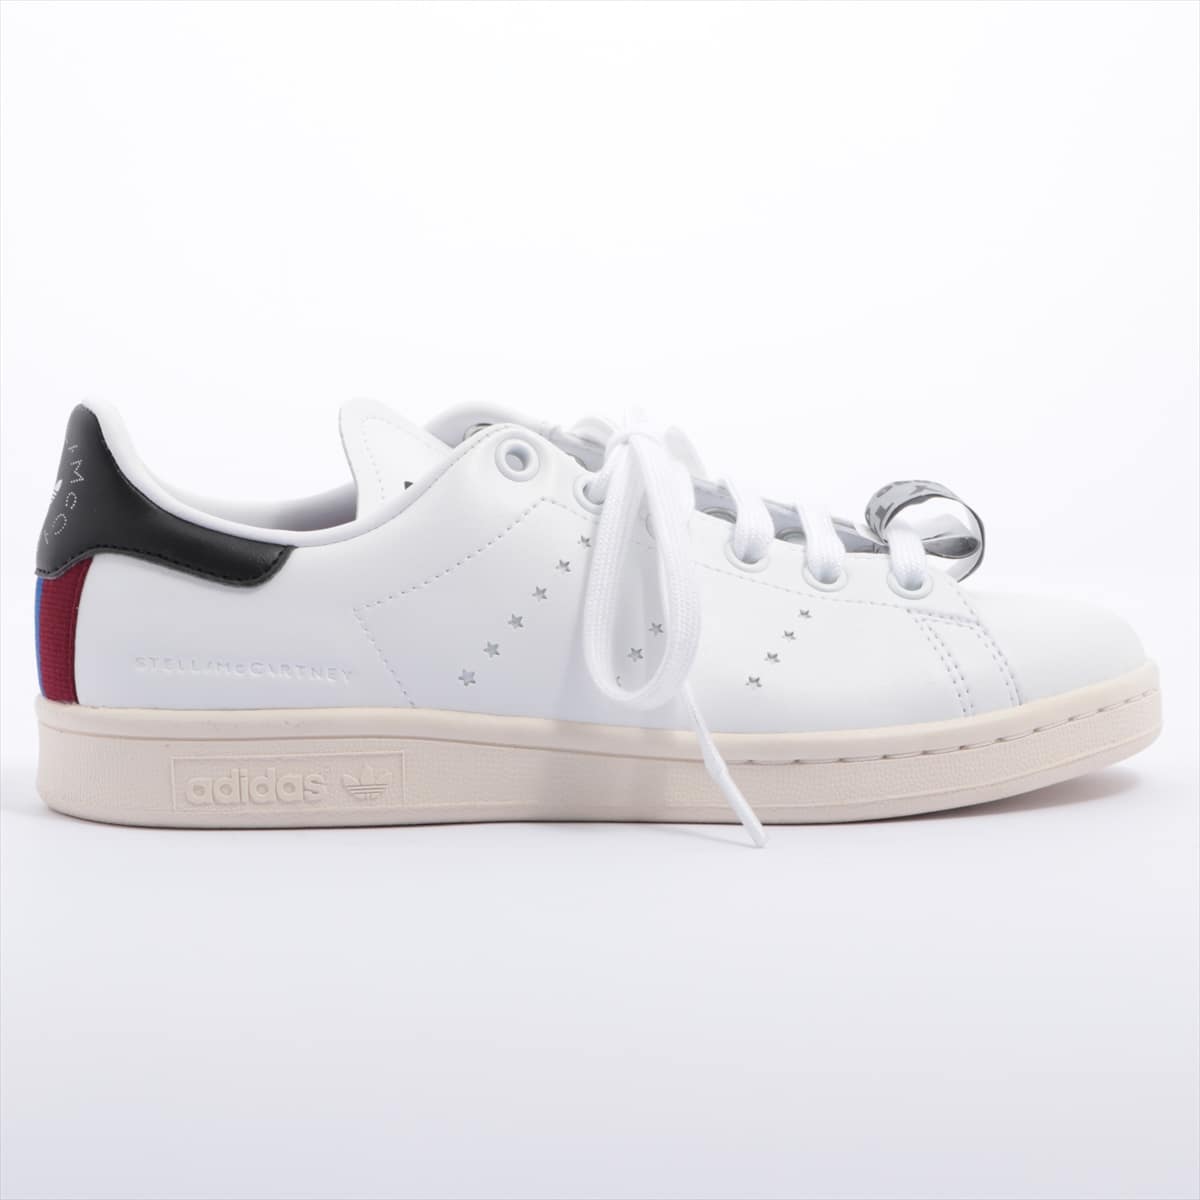 adidas by Stella McCartney Faux leather Sneakers 23cm Ladies' White Stan Smith G26984